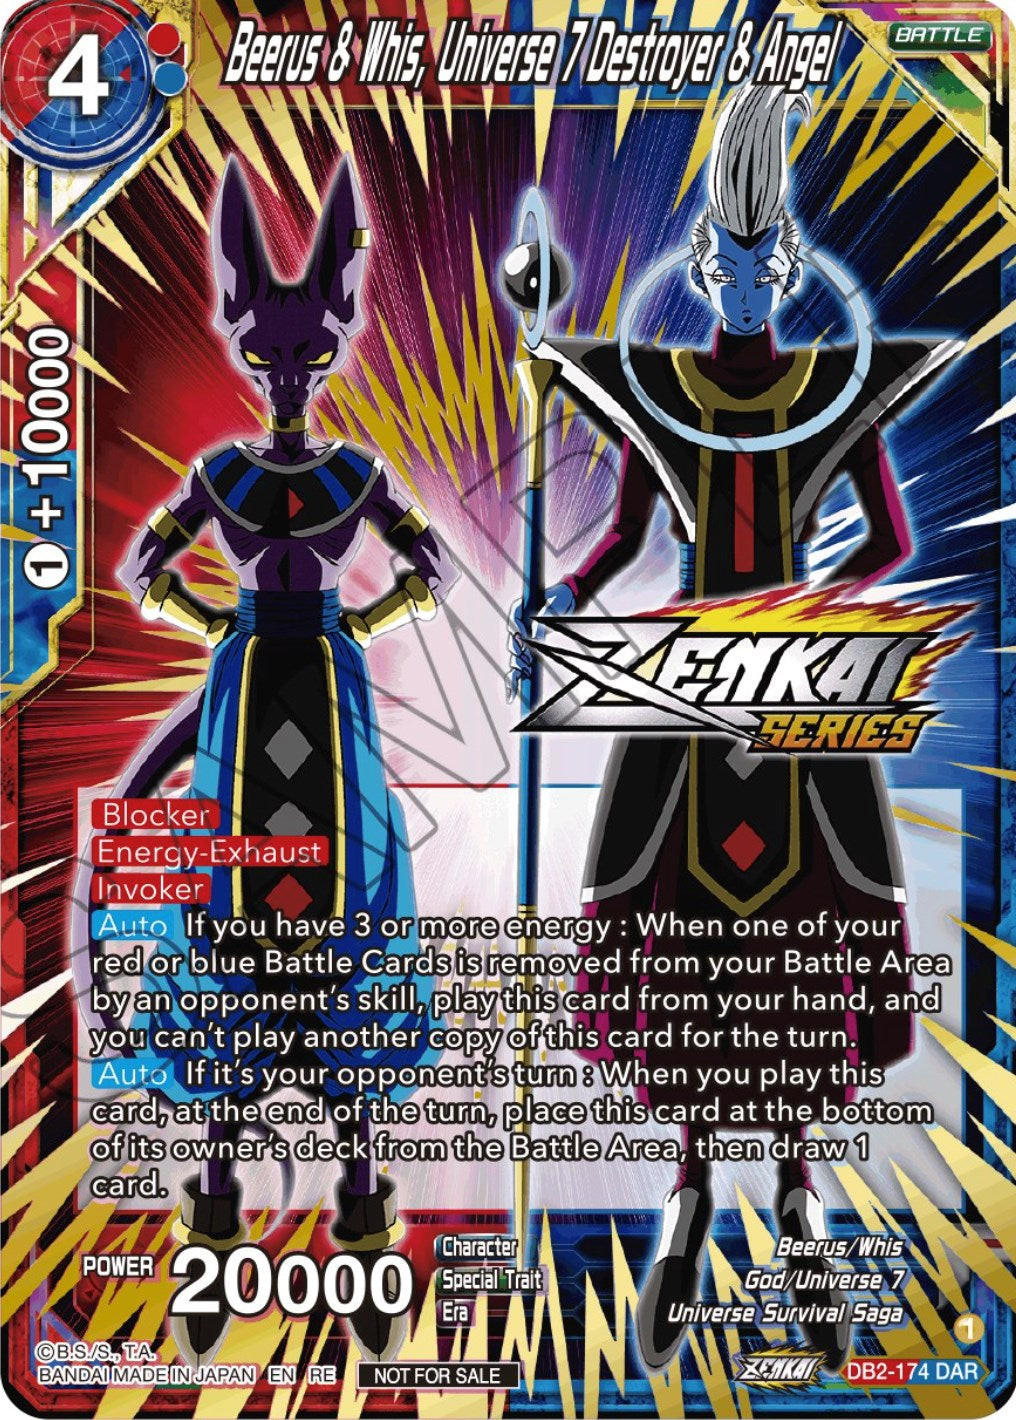 Beerus & Whis, Universe 7 Destroyer & Angel (Event Pack 12) (DB2-174) [Tournament Promotion Cards] | Devastation Store